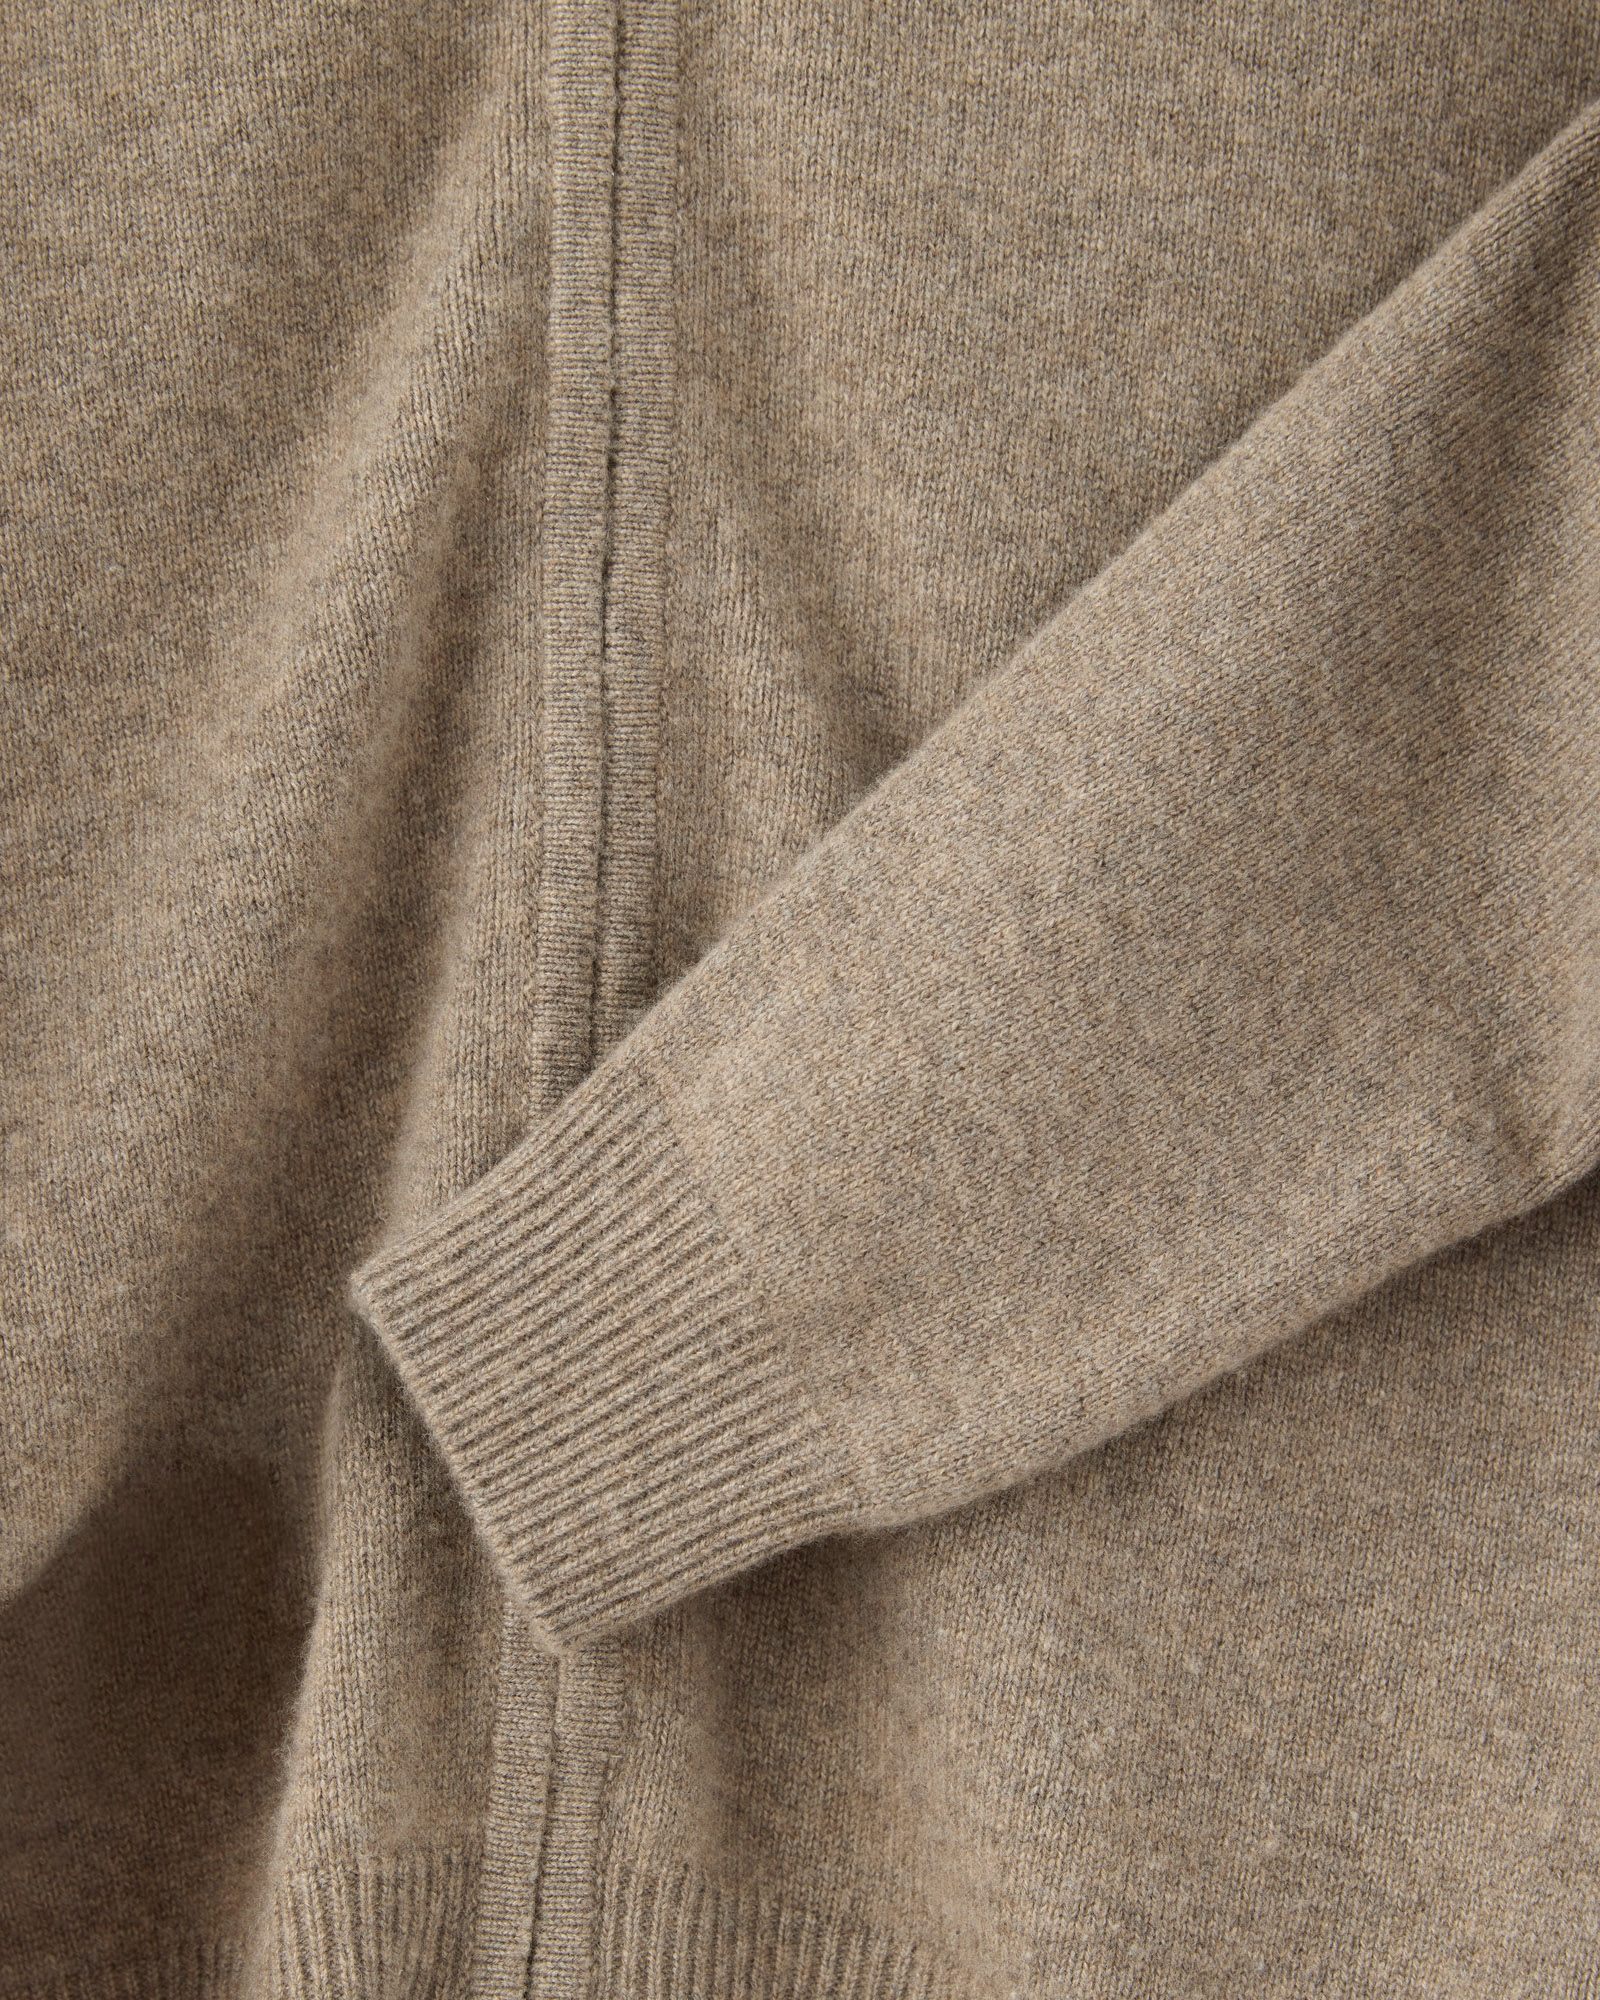 Full zip taupe cashmere image 2